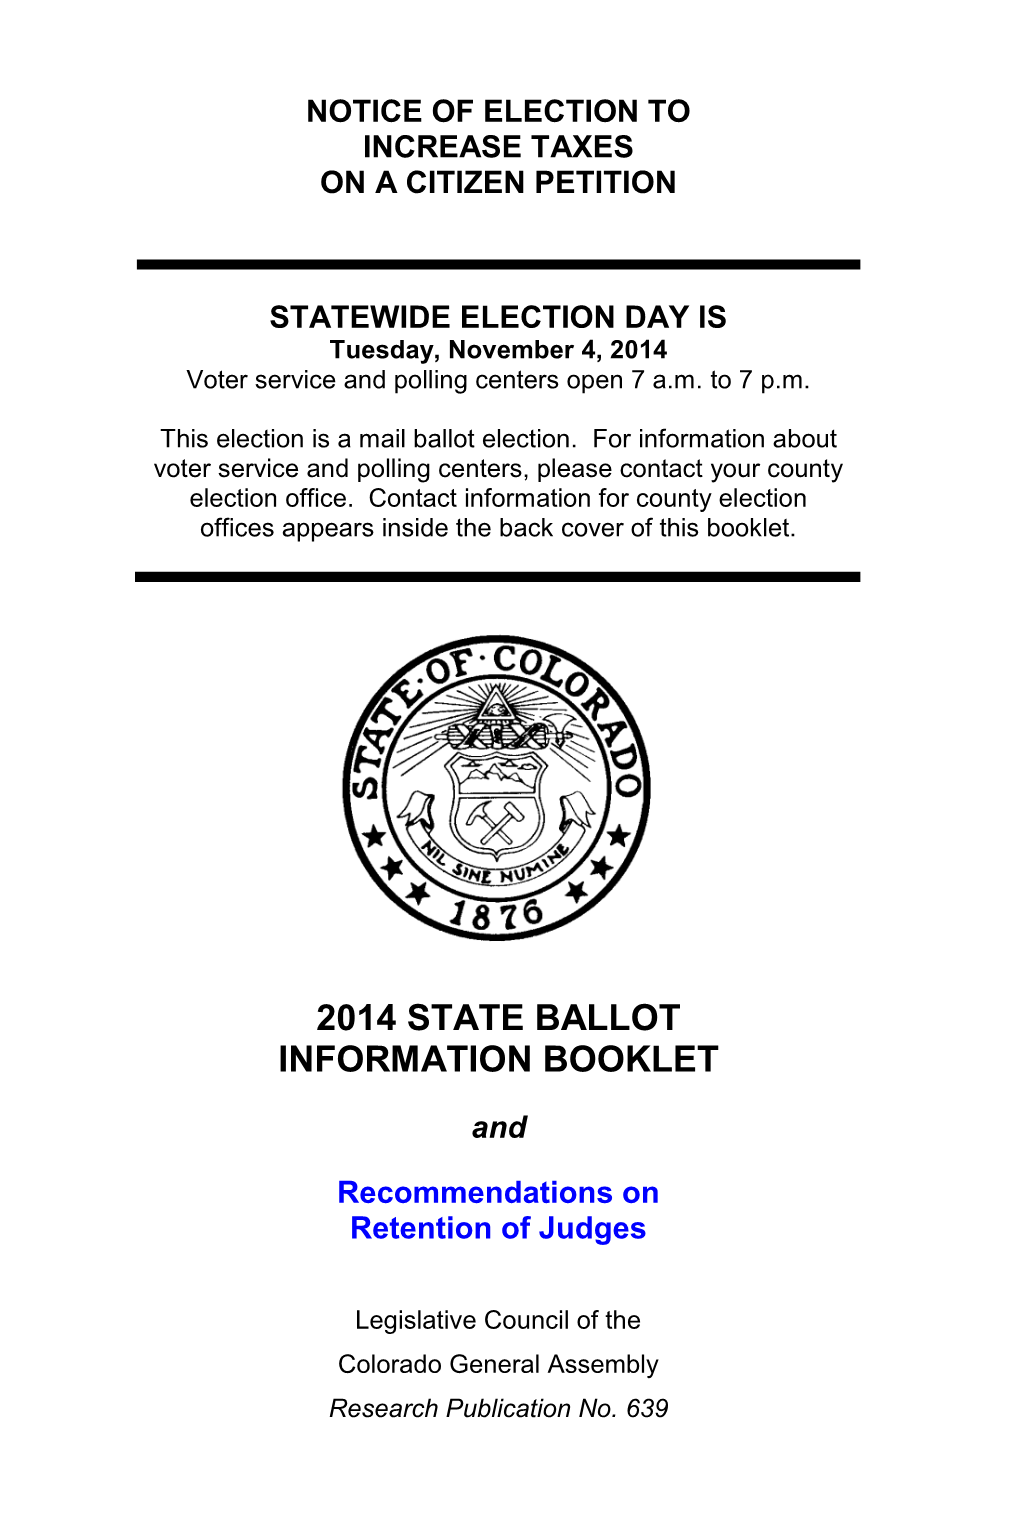 2014 State Ballot Information Booklet